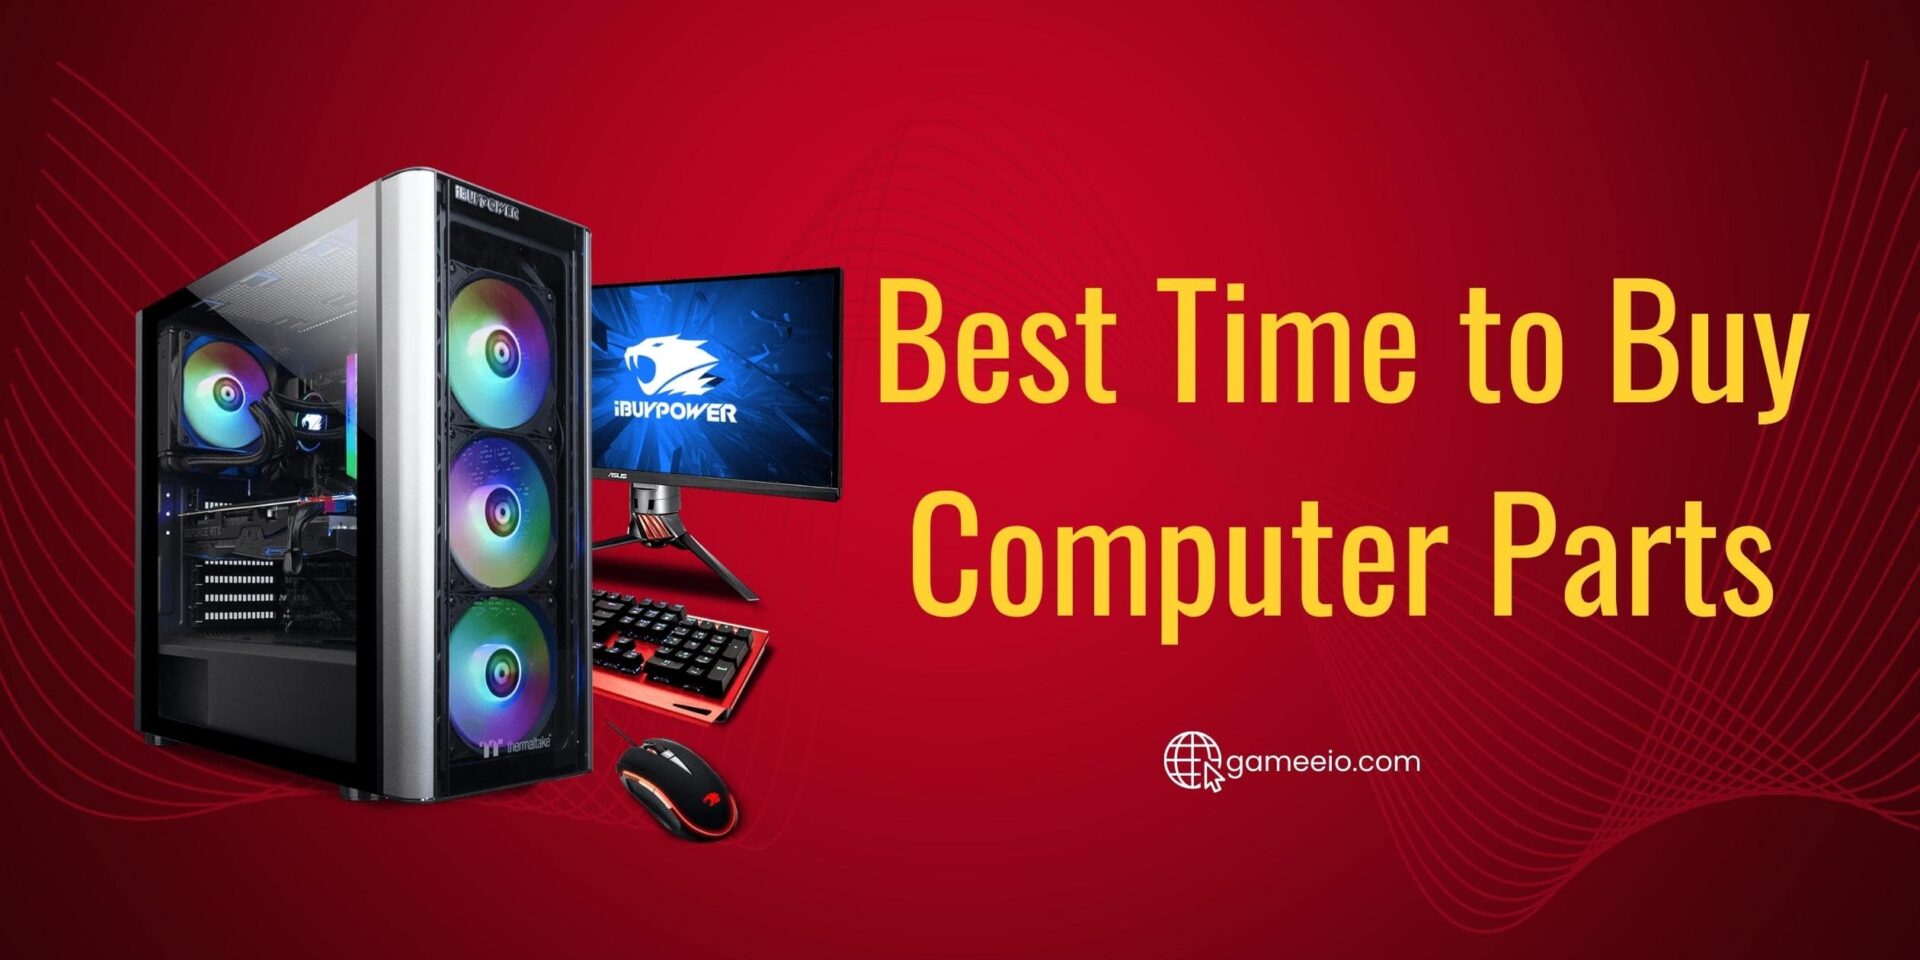 Best Time to Buy Computer Parts Gameeio Products & Guides